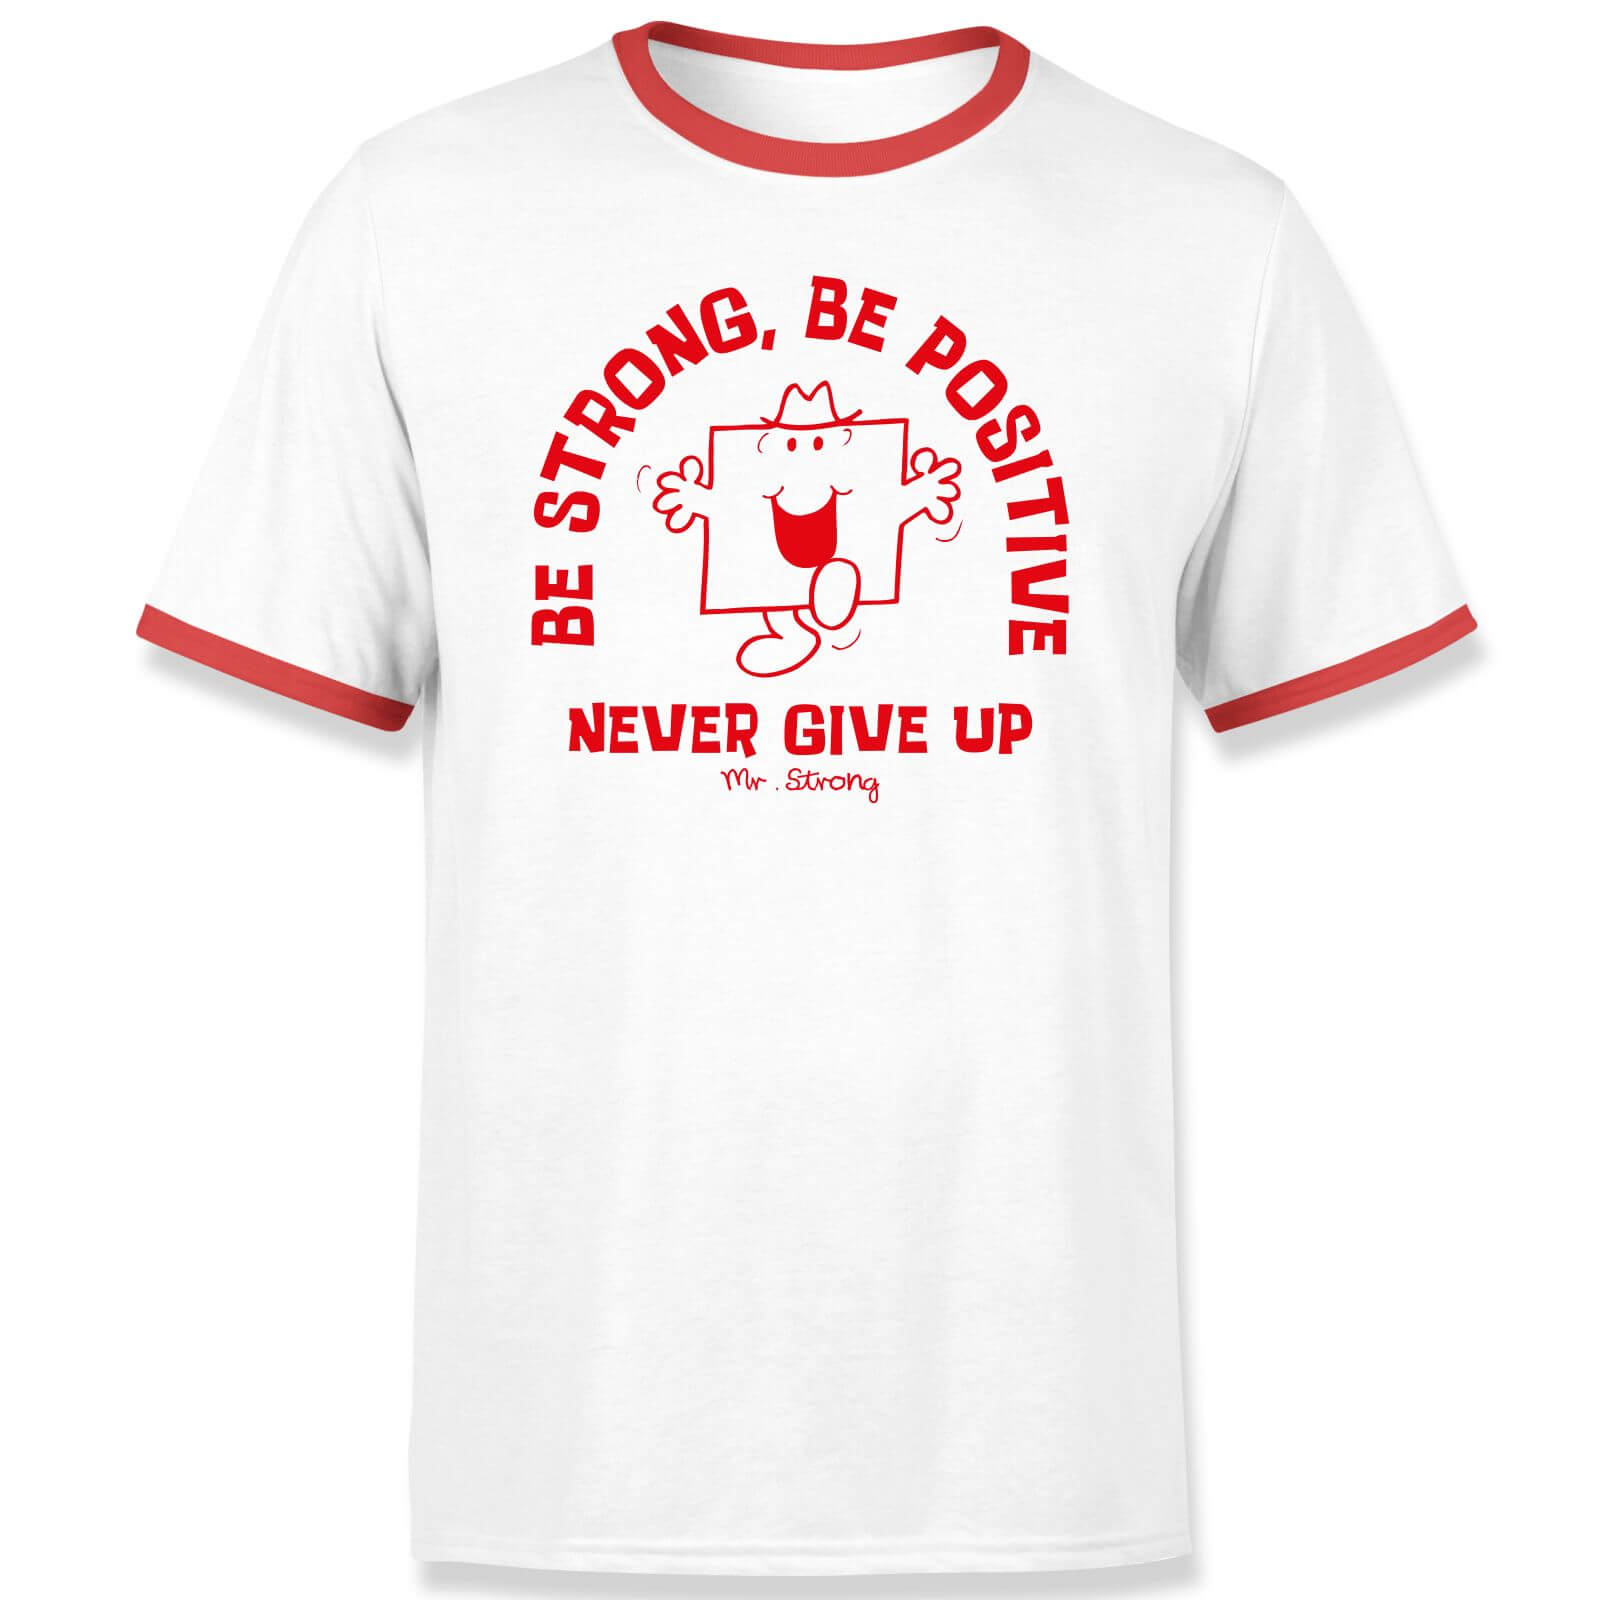 Mr Men & Little Miss Be Strong, Be Positive, Never Give Up Unisex Ringer T-Shirt - White/Red - XS - White/Red